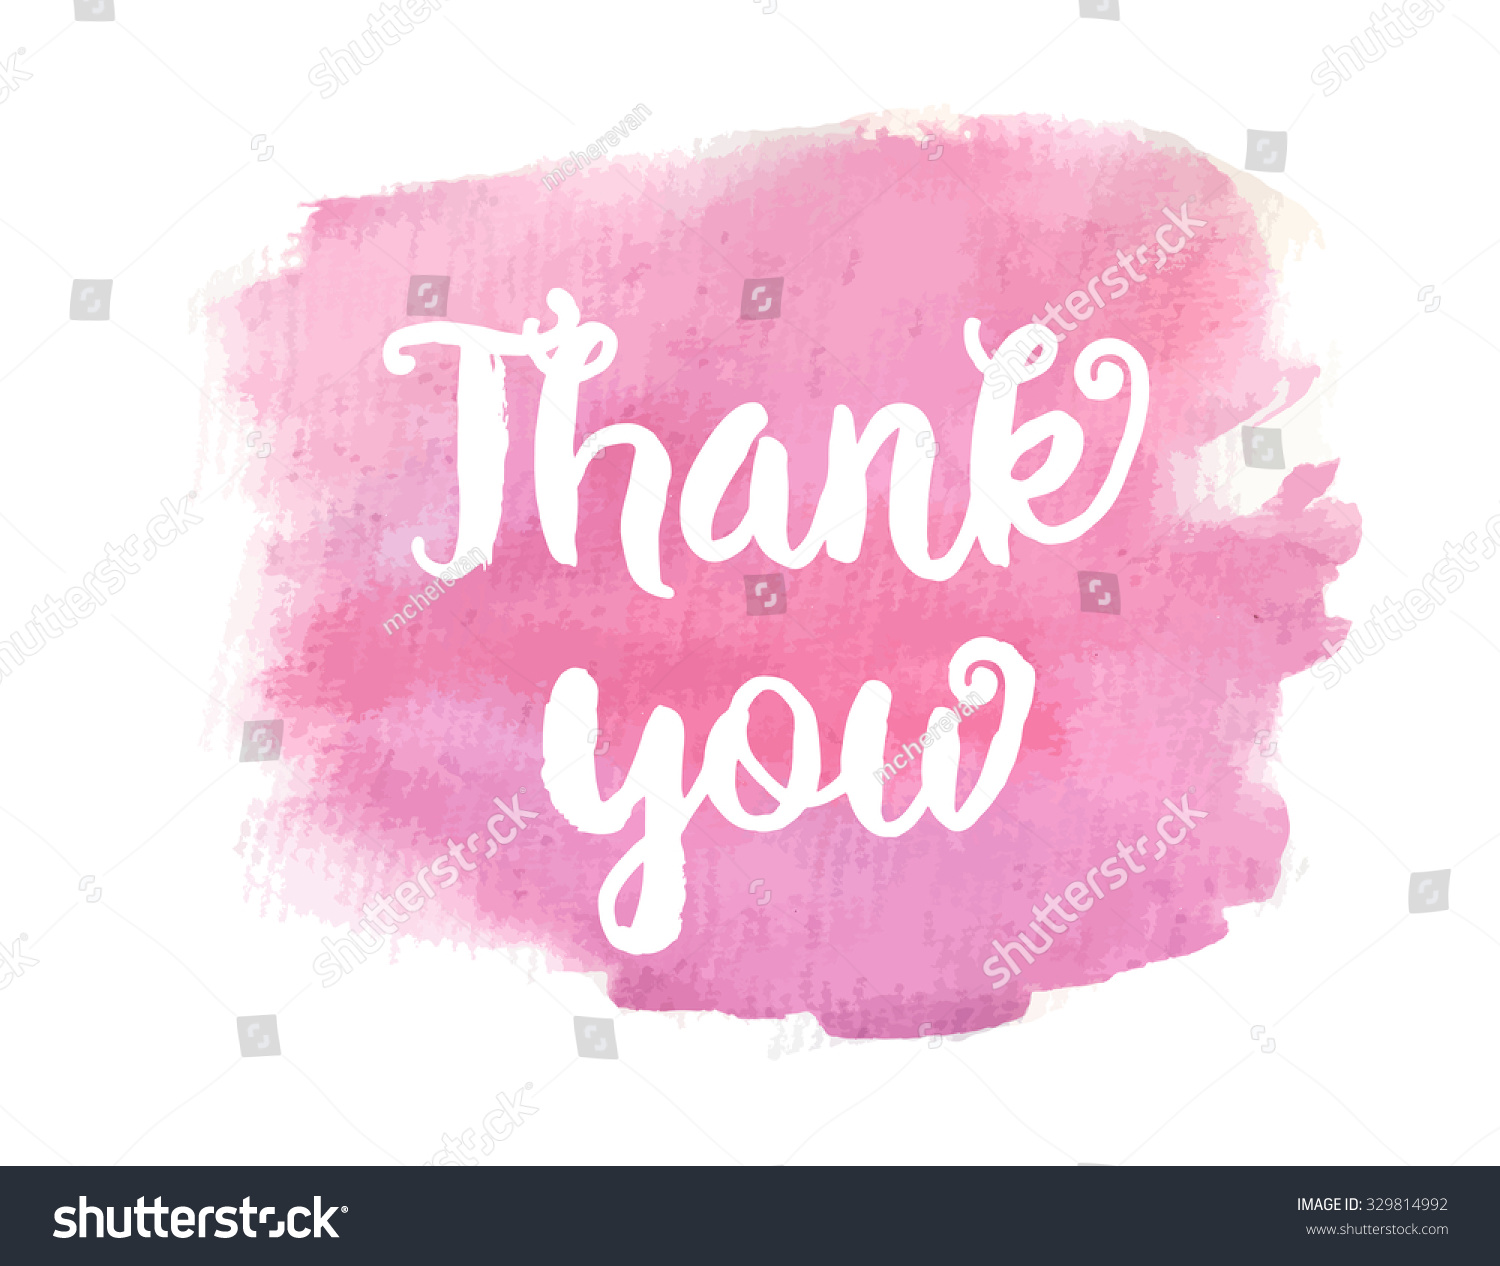 Thank You. Inspirational Motivational Quote. Vector Ink Painted ...